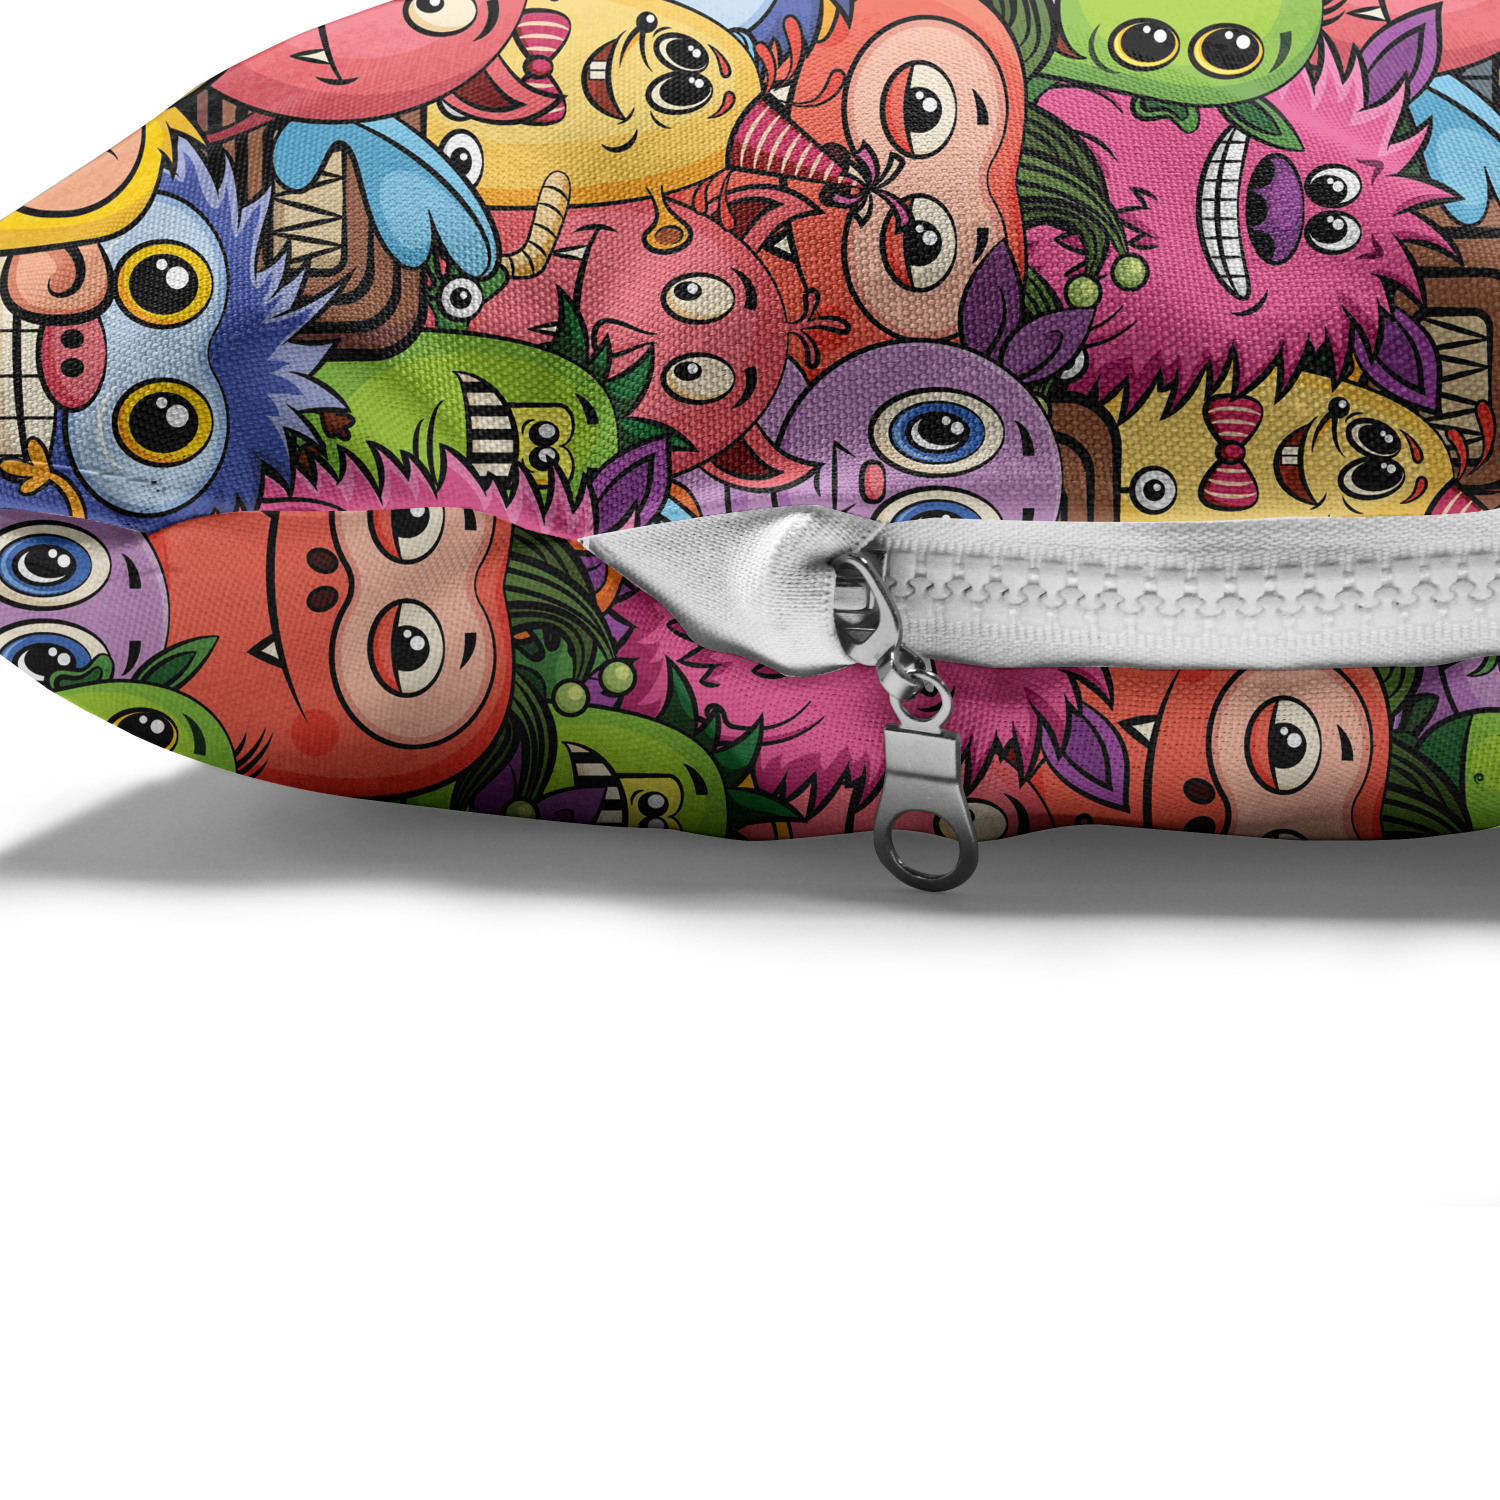 Alien Pet Bed, Carnival of Beasts Cartoon Monsters with Different Art Styles out of This World Theme, Resistant Pad for Dogs and Cats Cushion with Removable Cover, 24" x 39", Multicolor, by Ambesonne - image 4 of 4